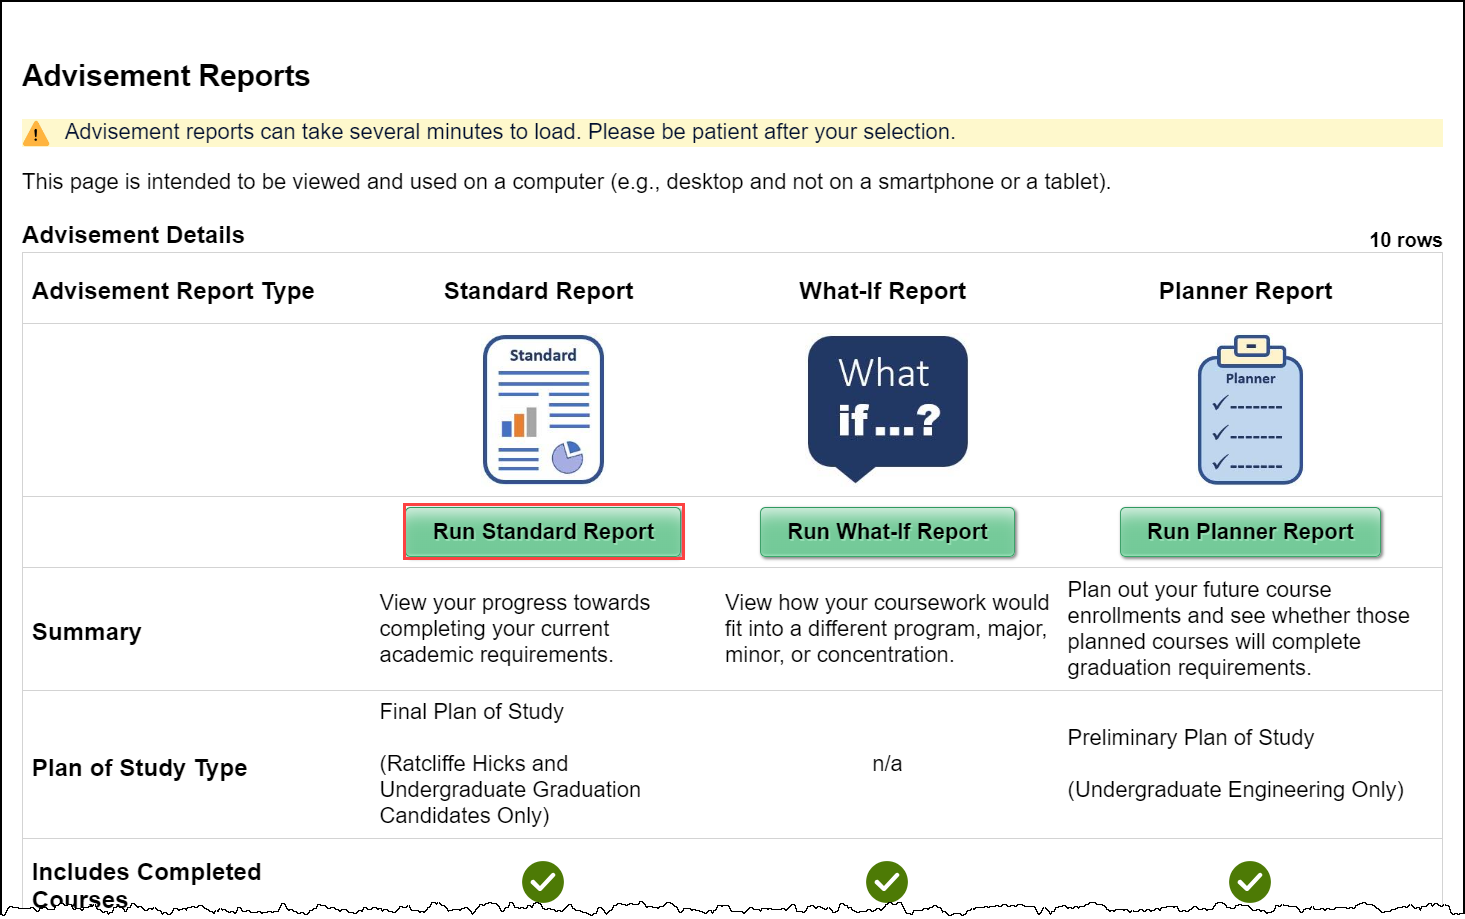 The Run Standard Report button is highlighted on the Advisement Report landing page.